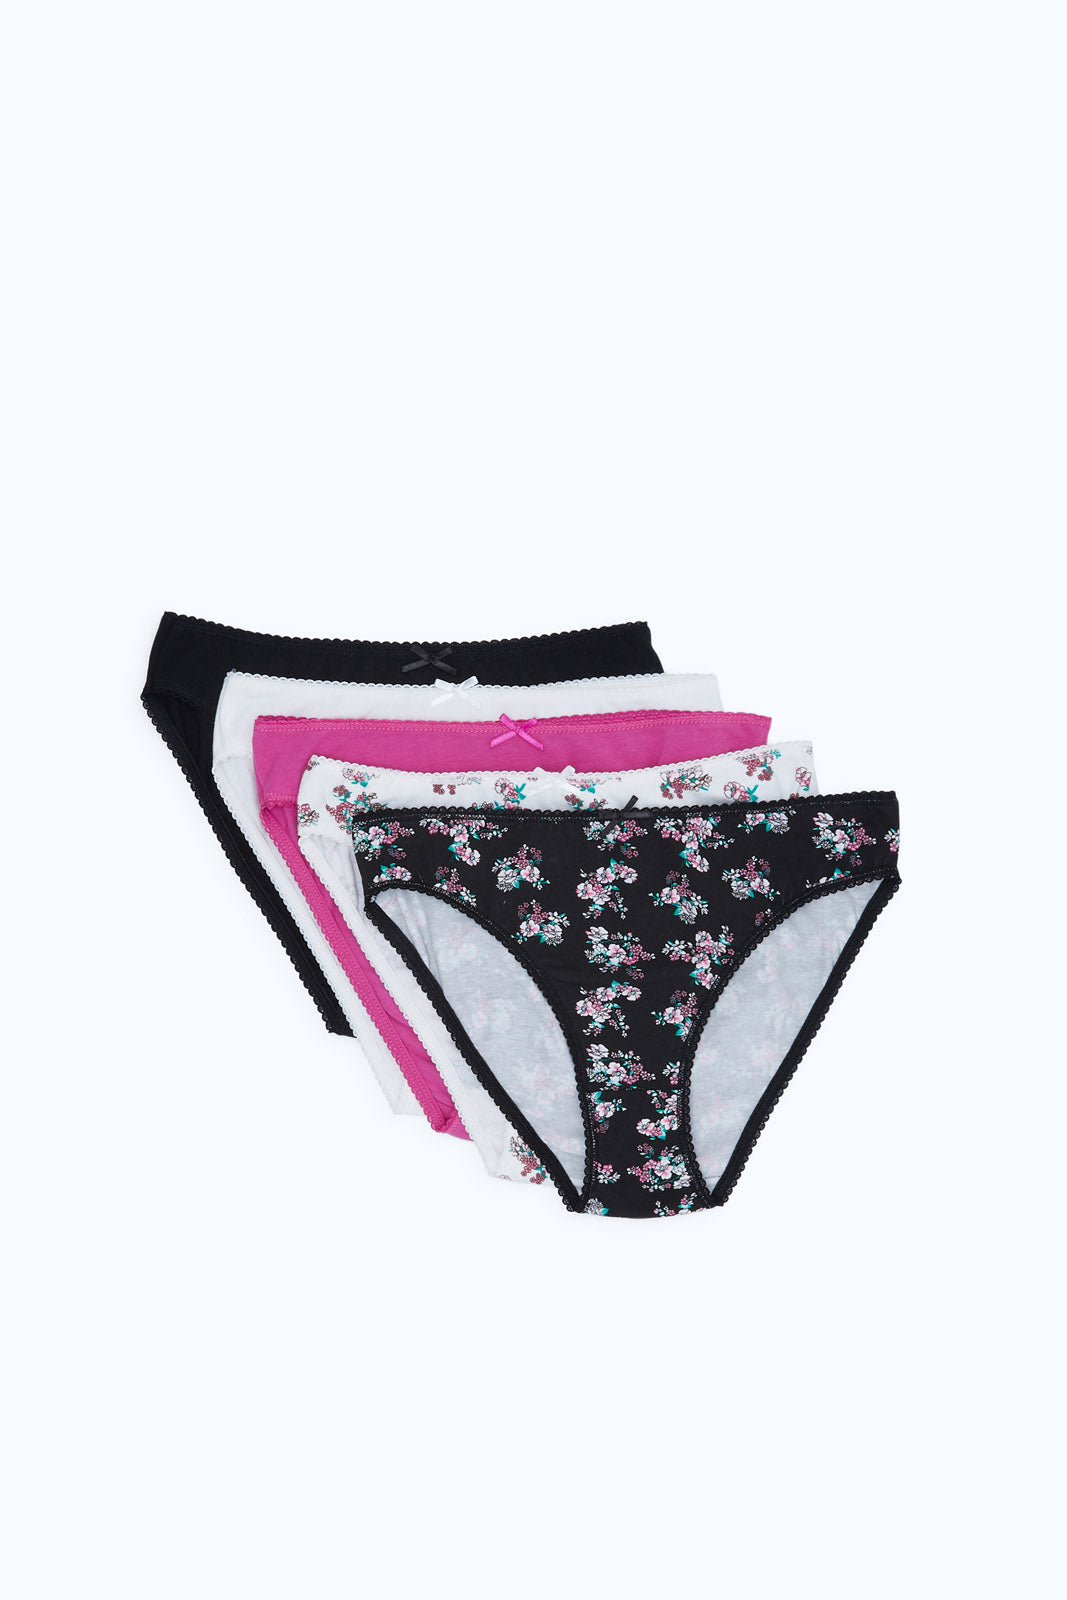 5 Pack Plain & Floral Print Full Knickers